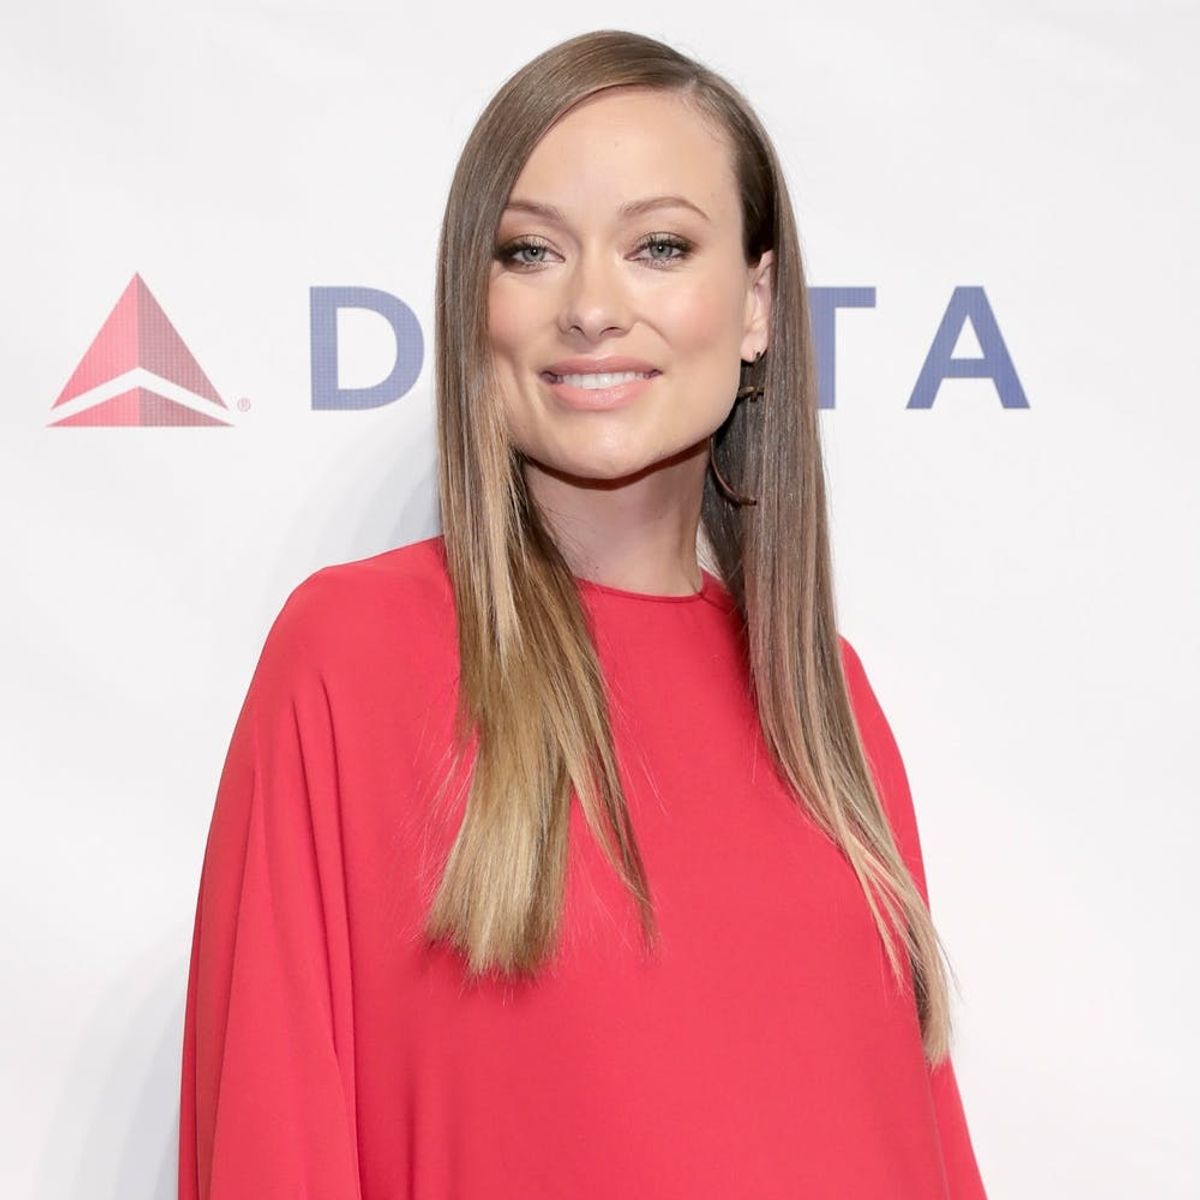 This Is the Unconventional Way Olivia Wilde Just Revealed Her Baby’s Sex